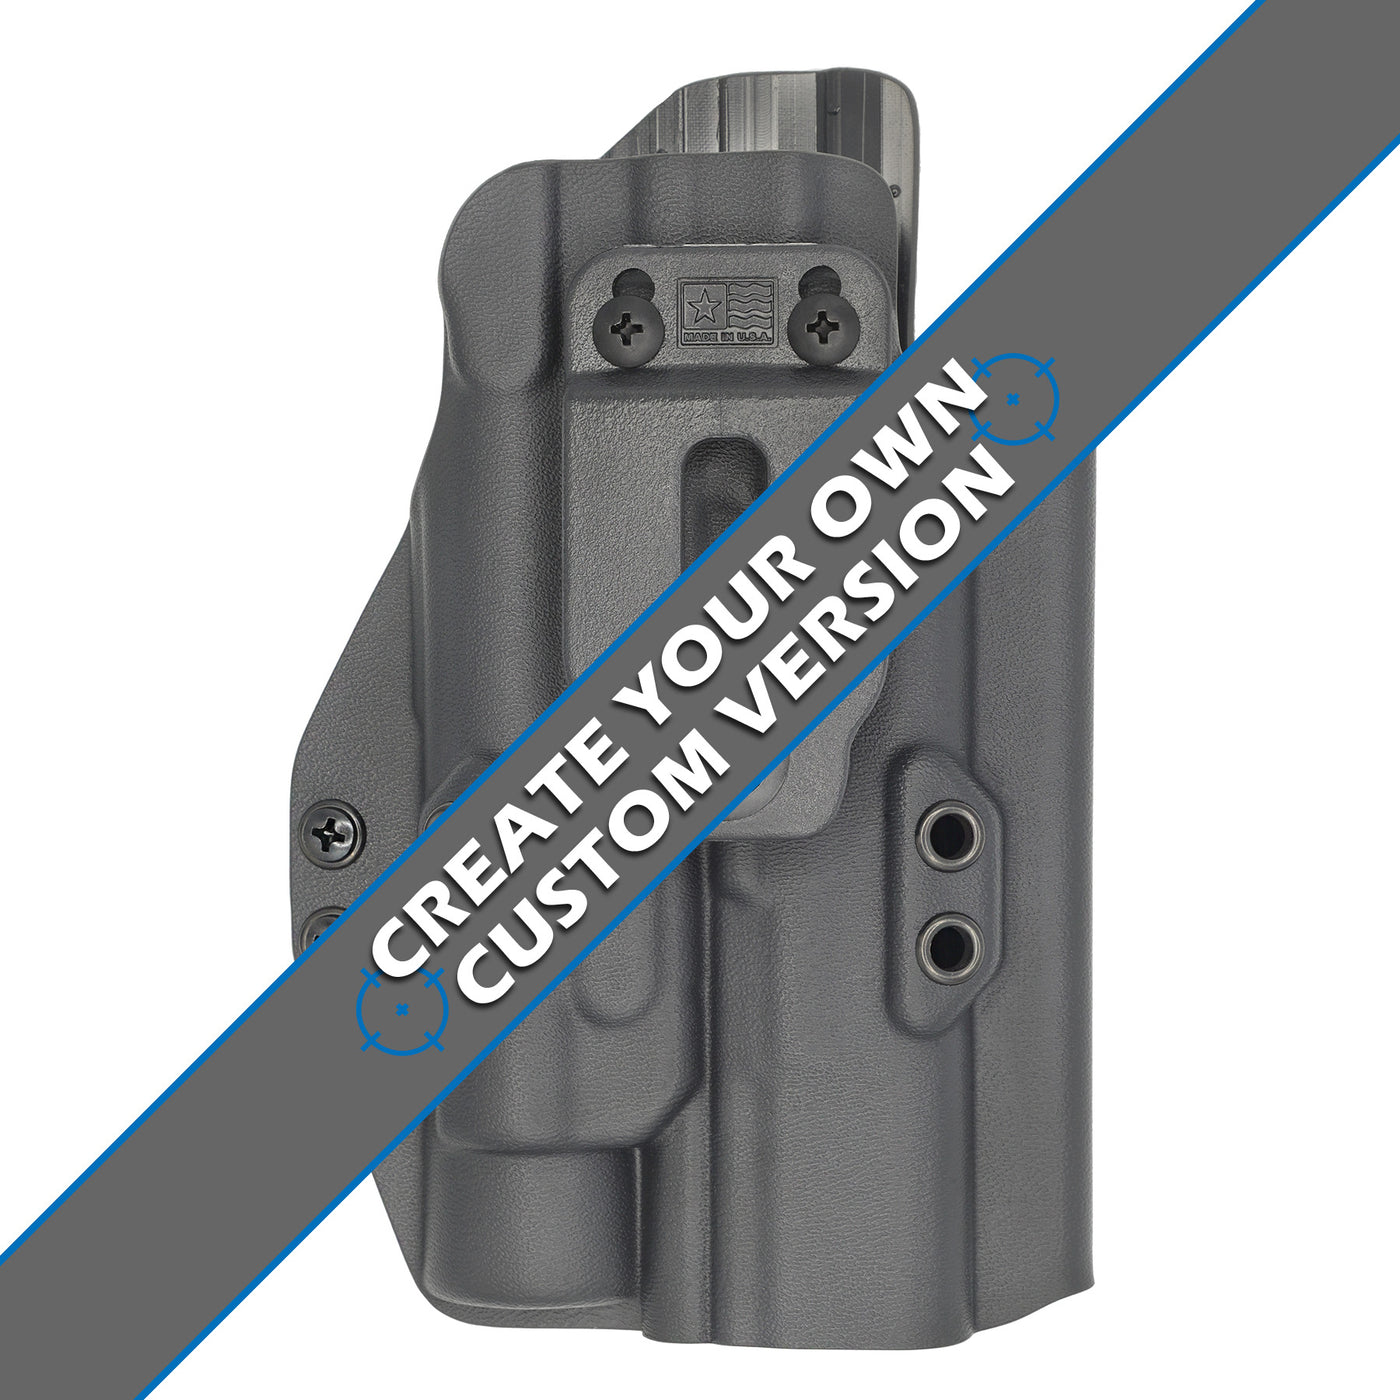 C&G Holsters custom IWB Tactical CZ P07/9 TLR1